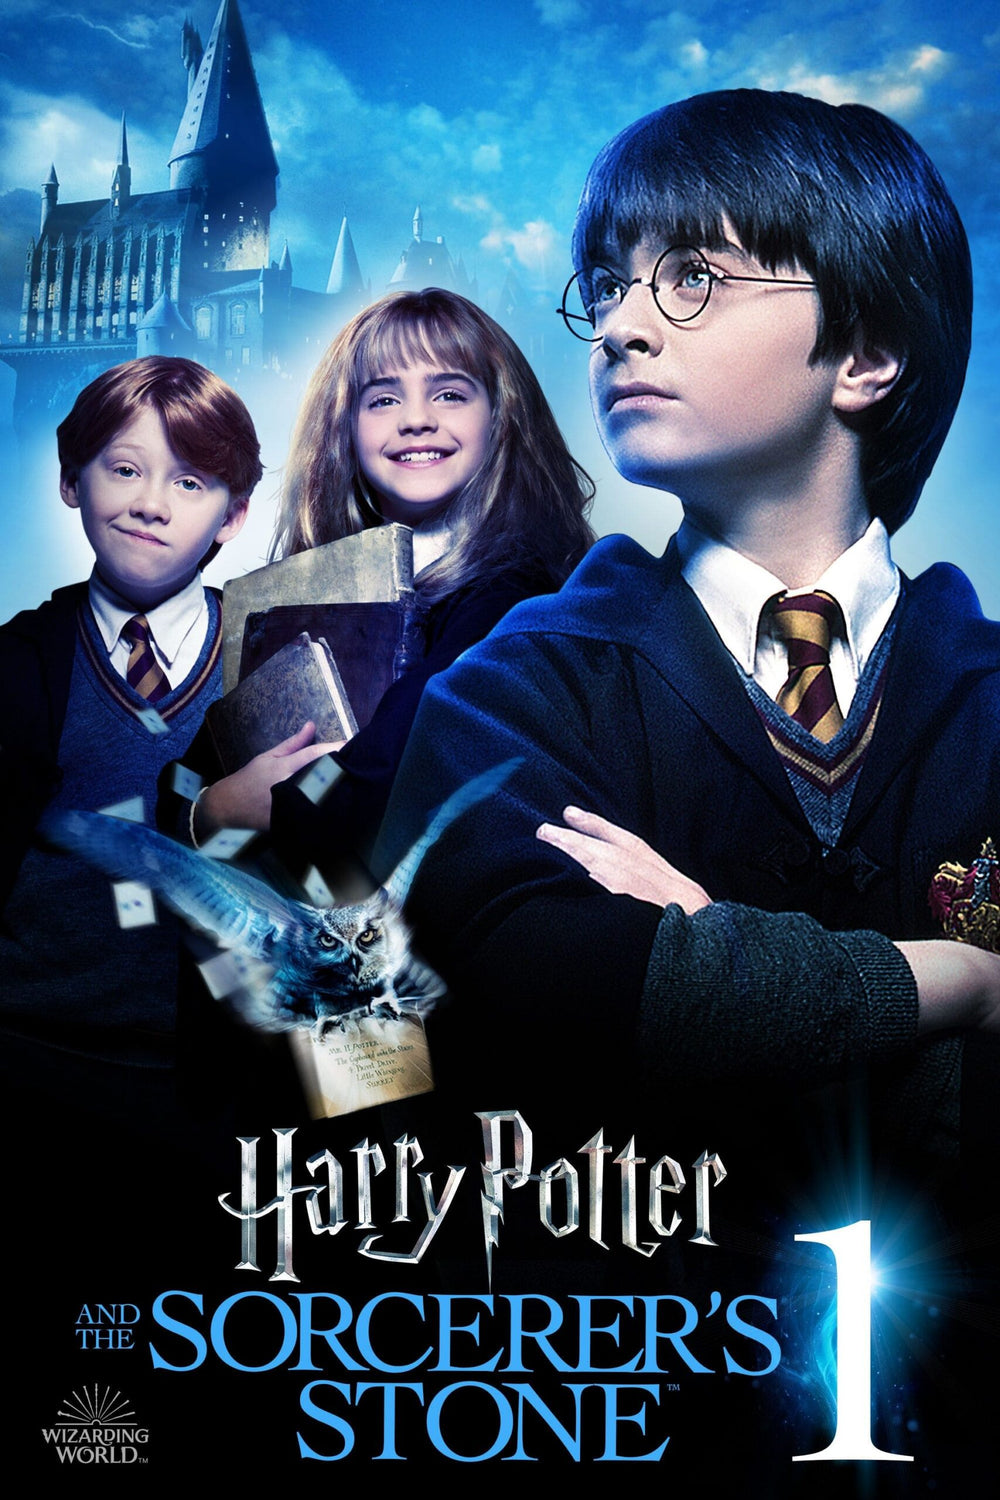 HARRY POTTER AND THE SORCERER'S STONE 4K Vudu/iTunes Via Moviesanywhere